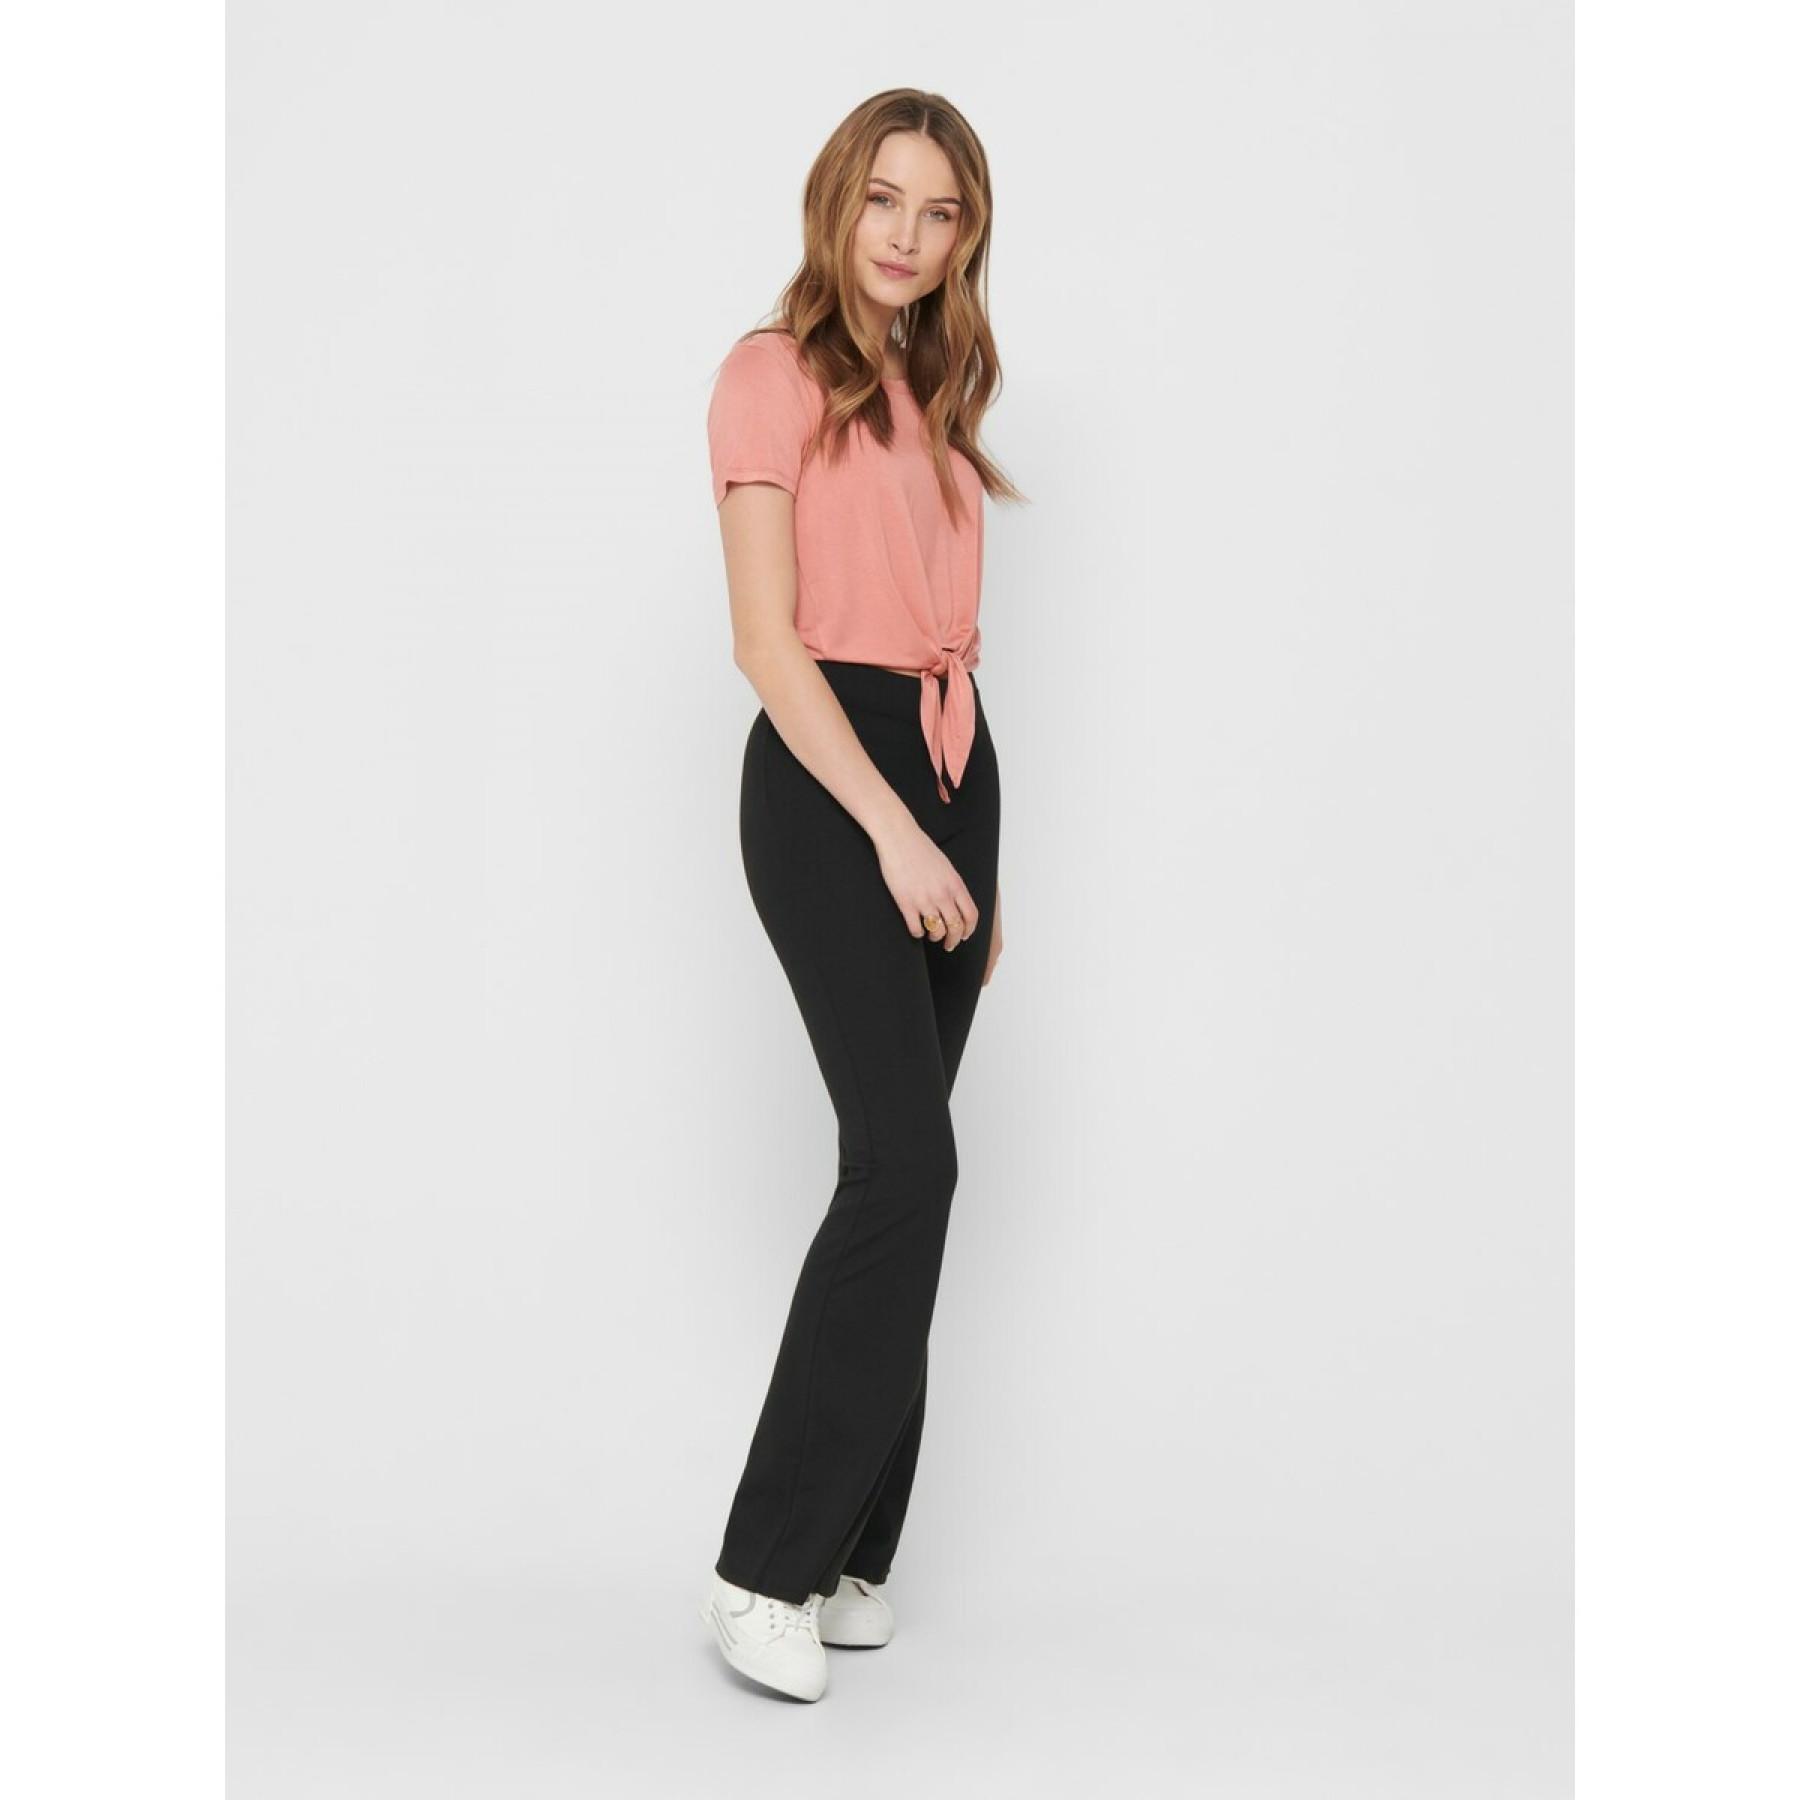 Trousers woman Only Fever stretch flaired